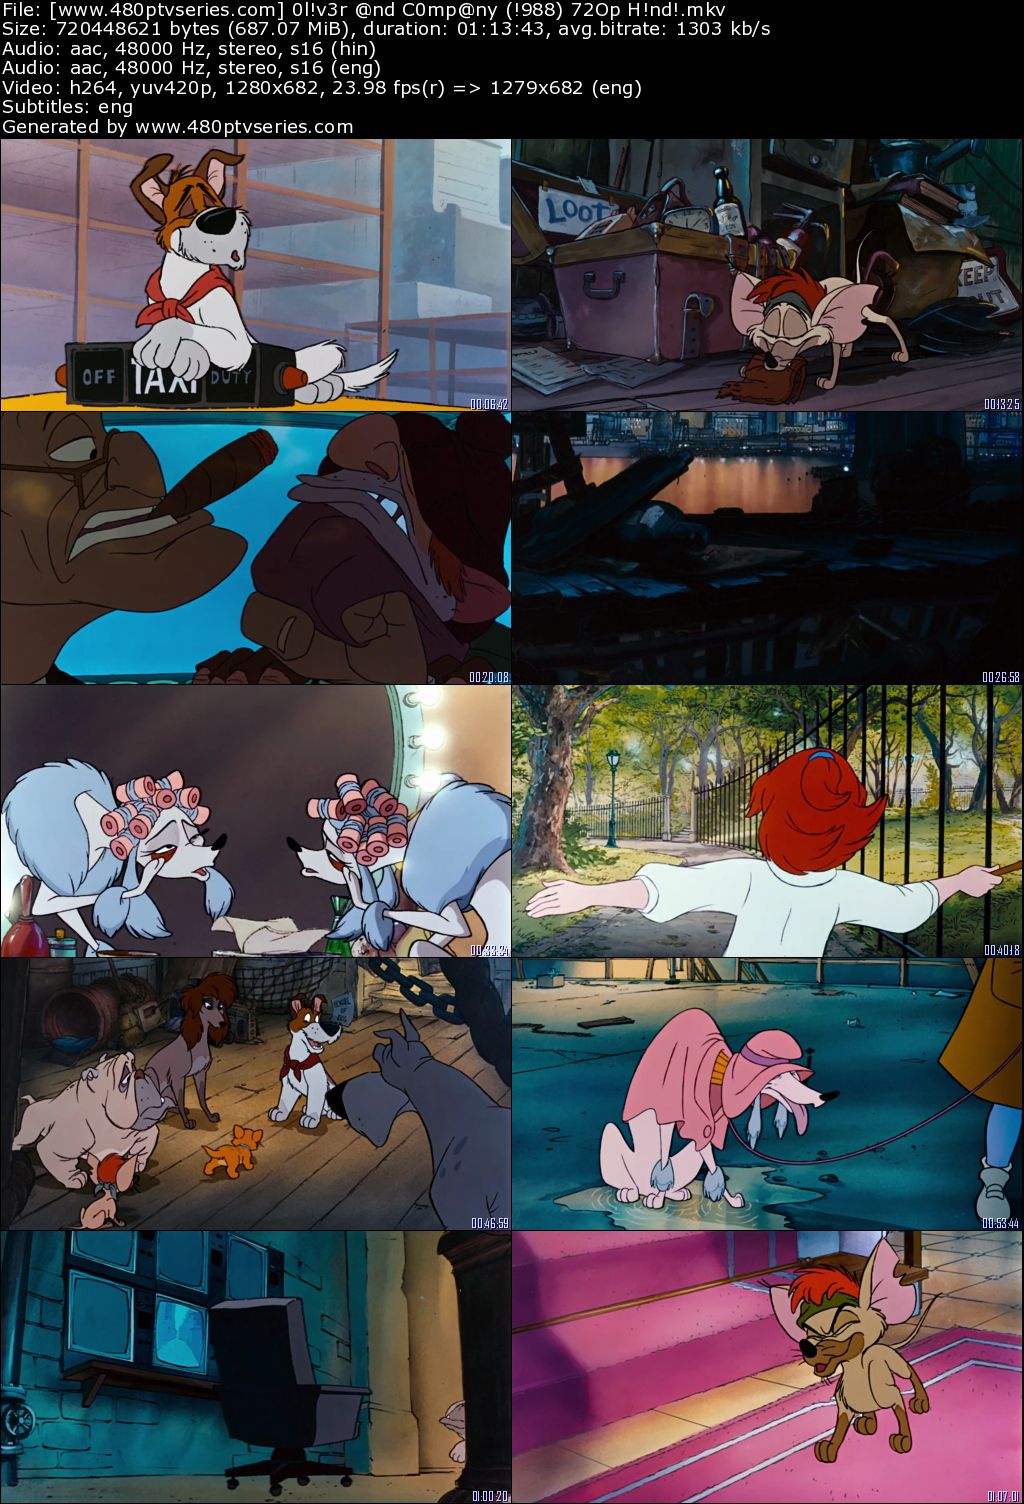 Download Oliver & Company (1988) 700MB Full Hindi Dual Audio Movie Download 720p Bluray Free Watch Online Full Movie Download Worldfree4u 9xmovies